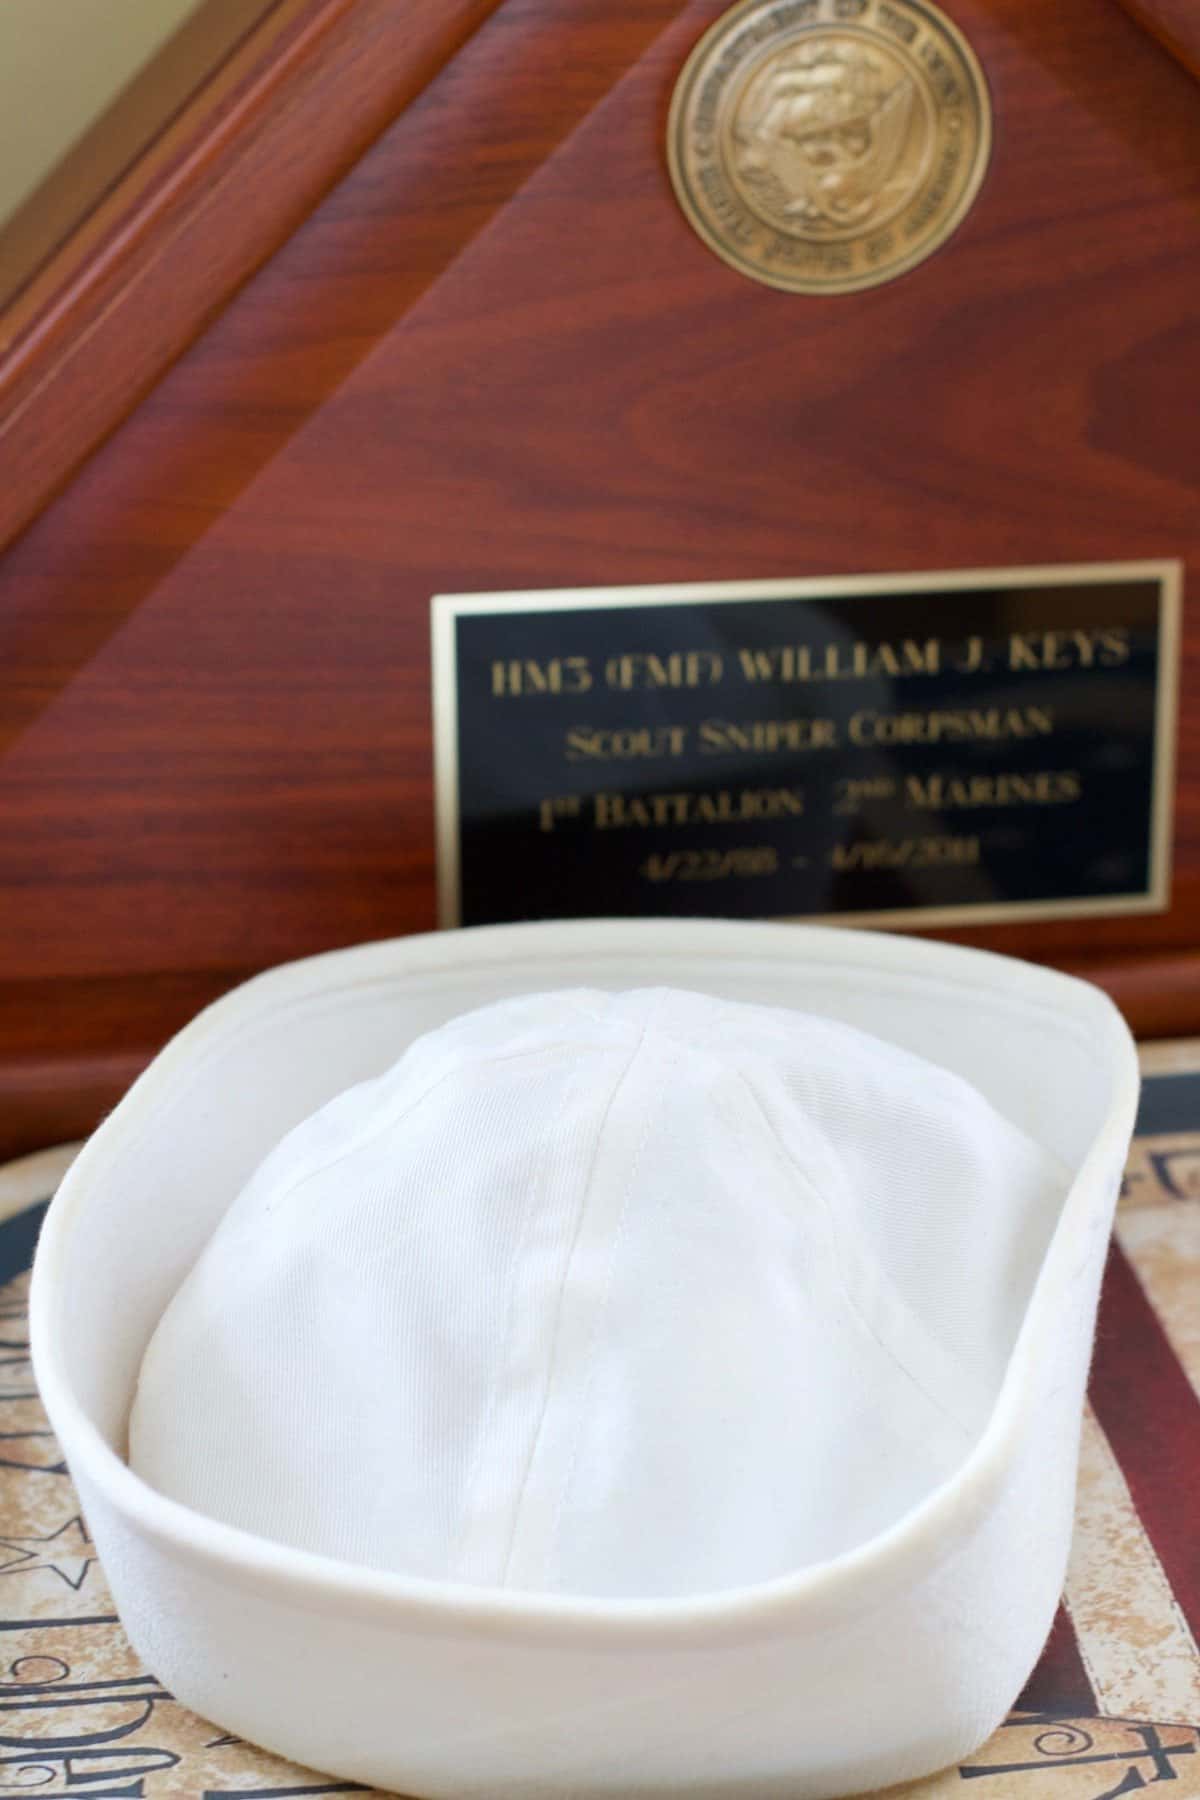 White sailor cap is one of my favorites of the many hats he wore.